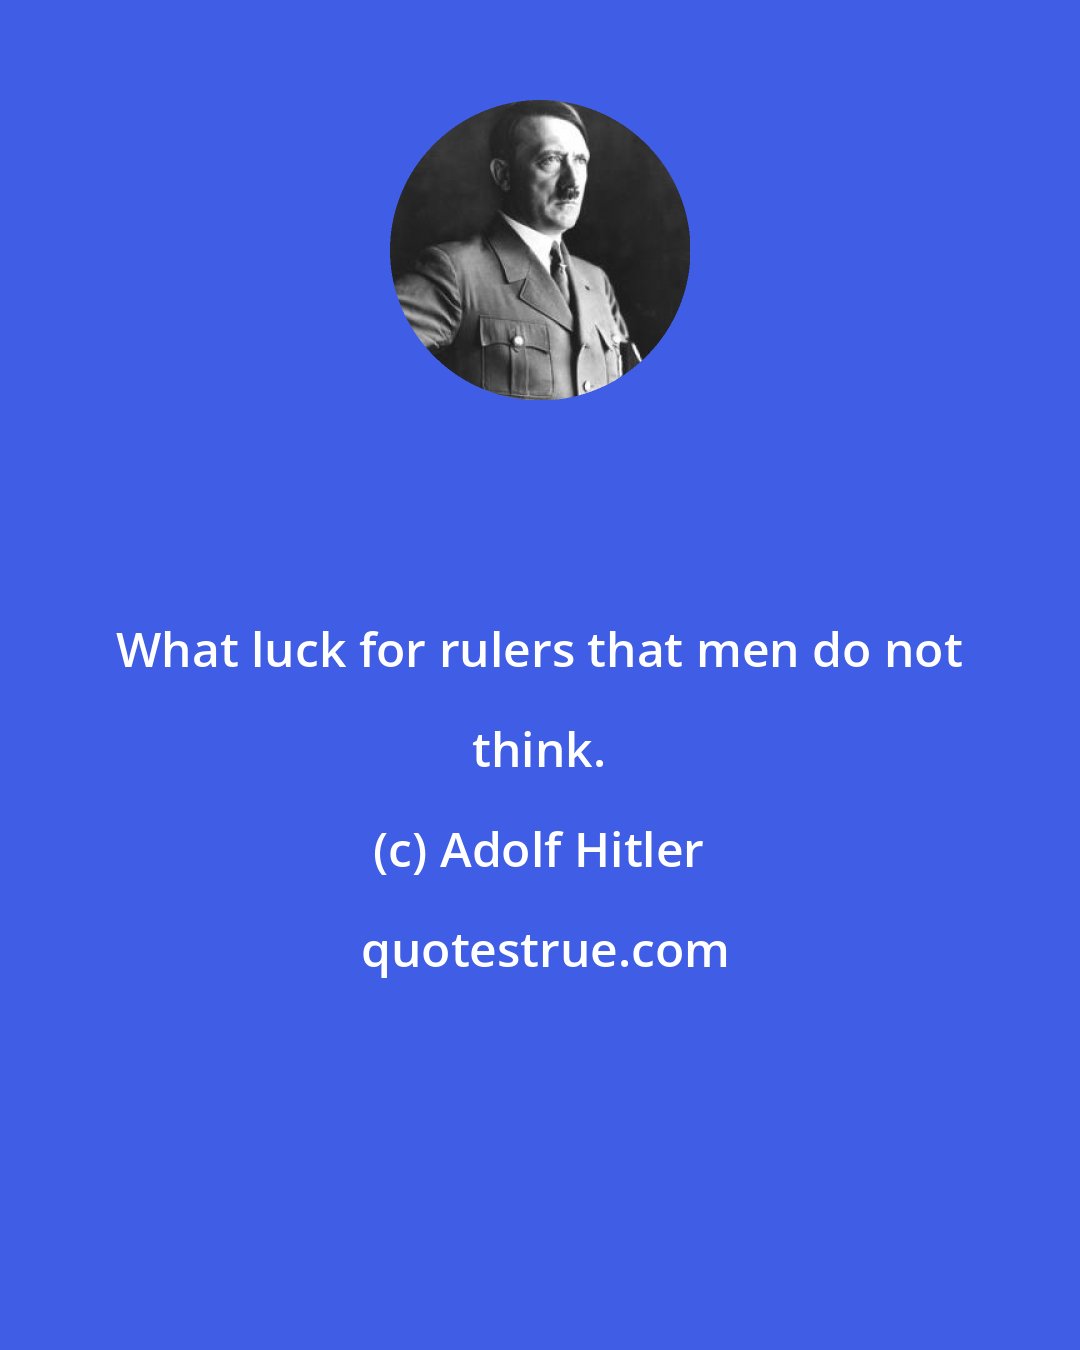 Adolf Hitler: What luck for rulers that men do not think.